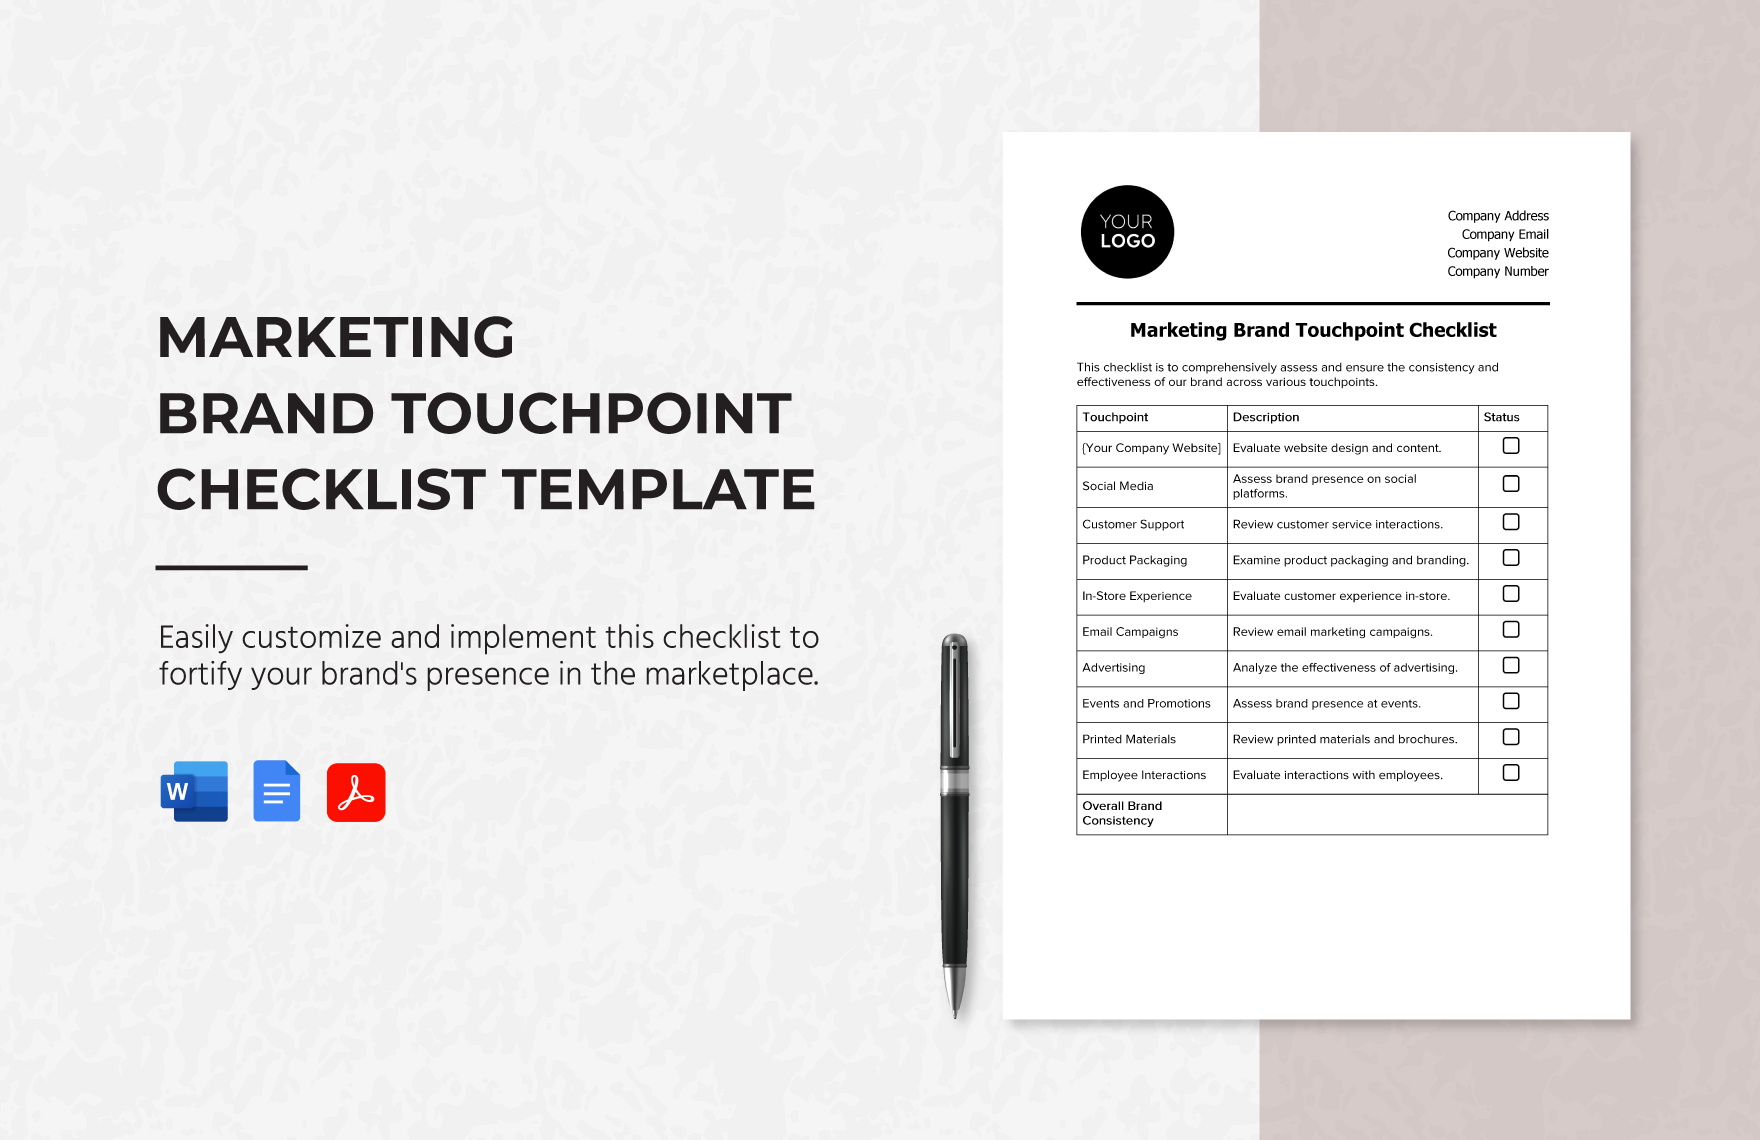 Marketing Brand Touchpoint Checklist Template in Word, Google Docs, PDF